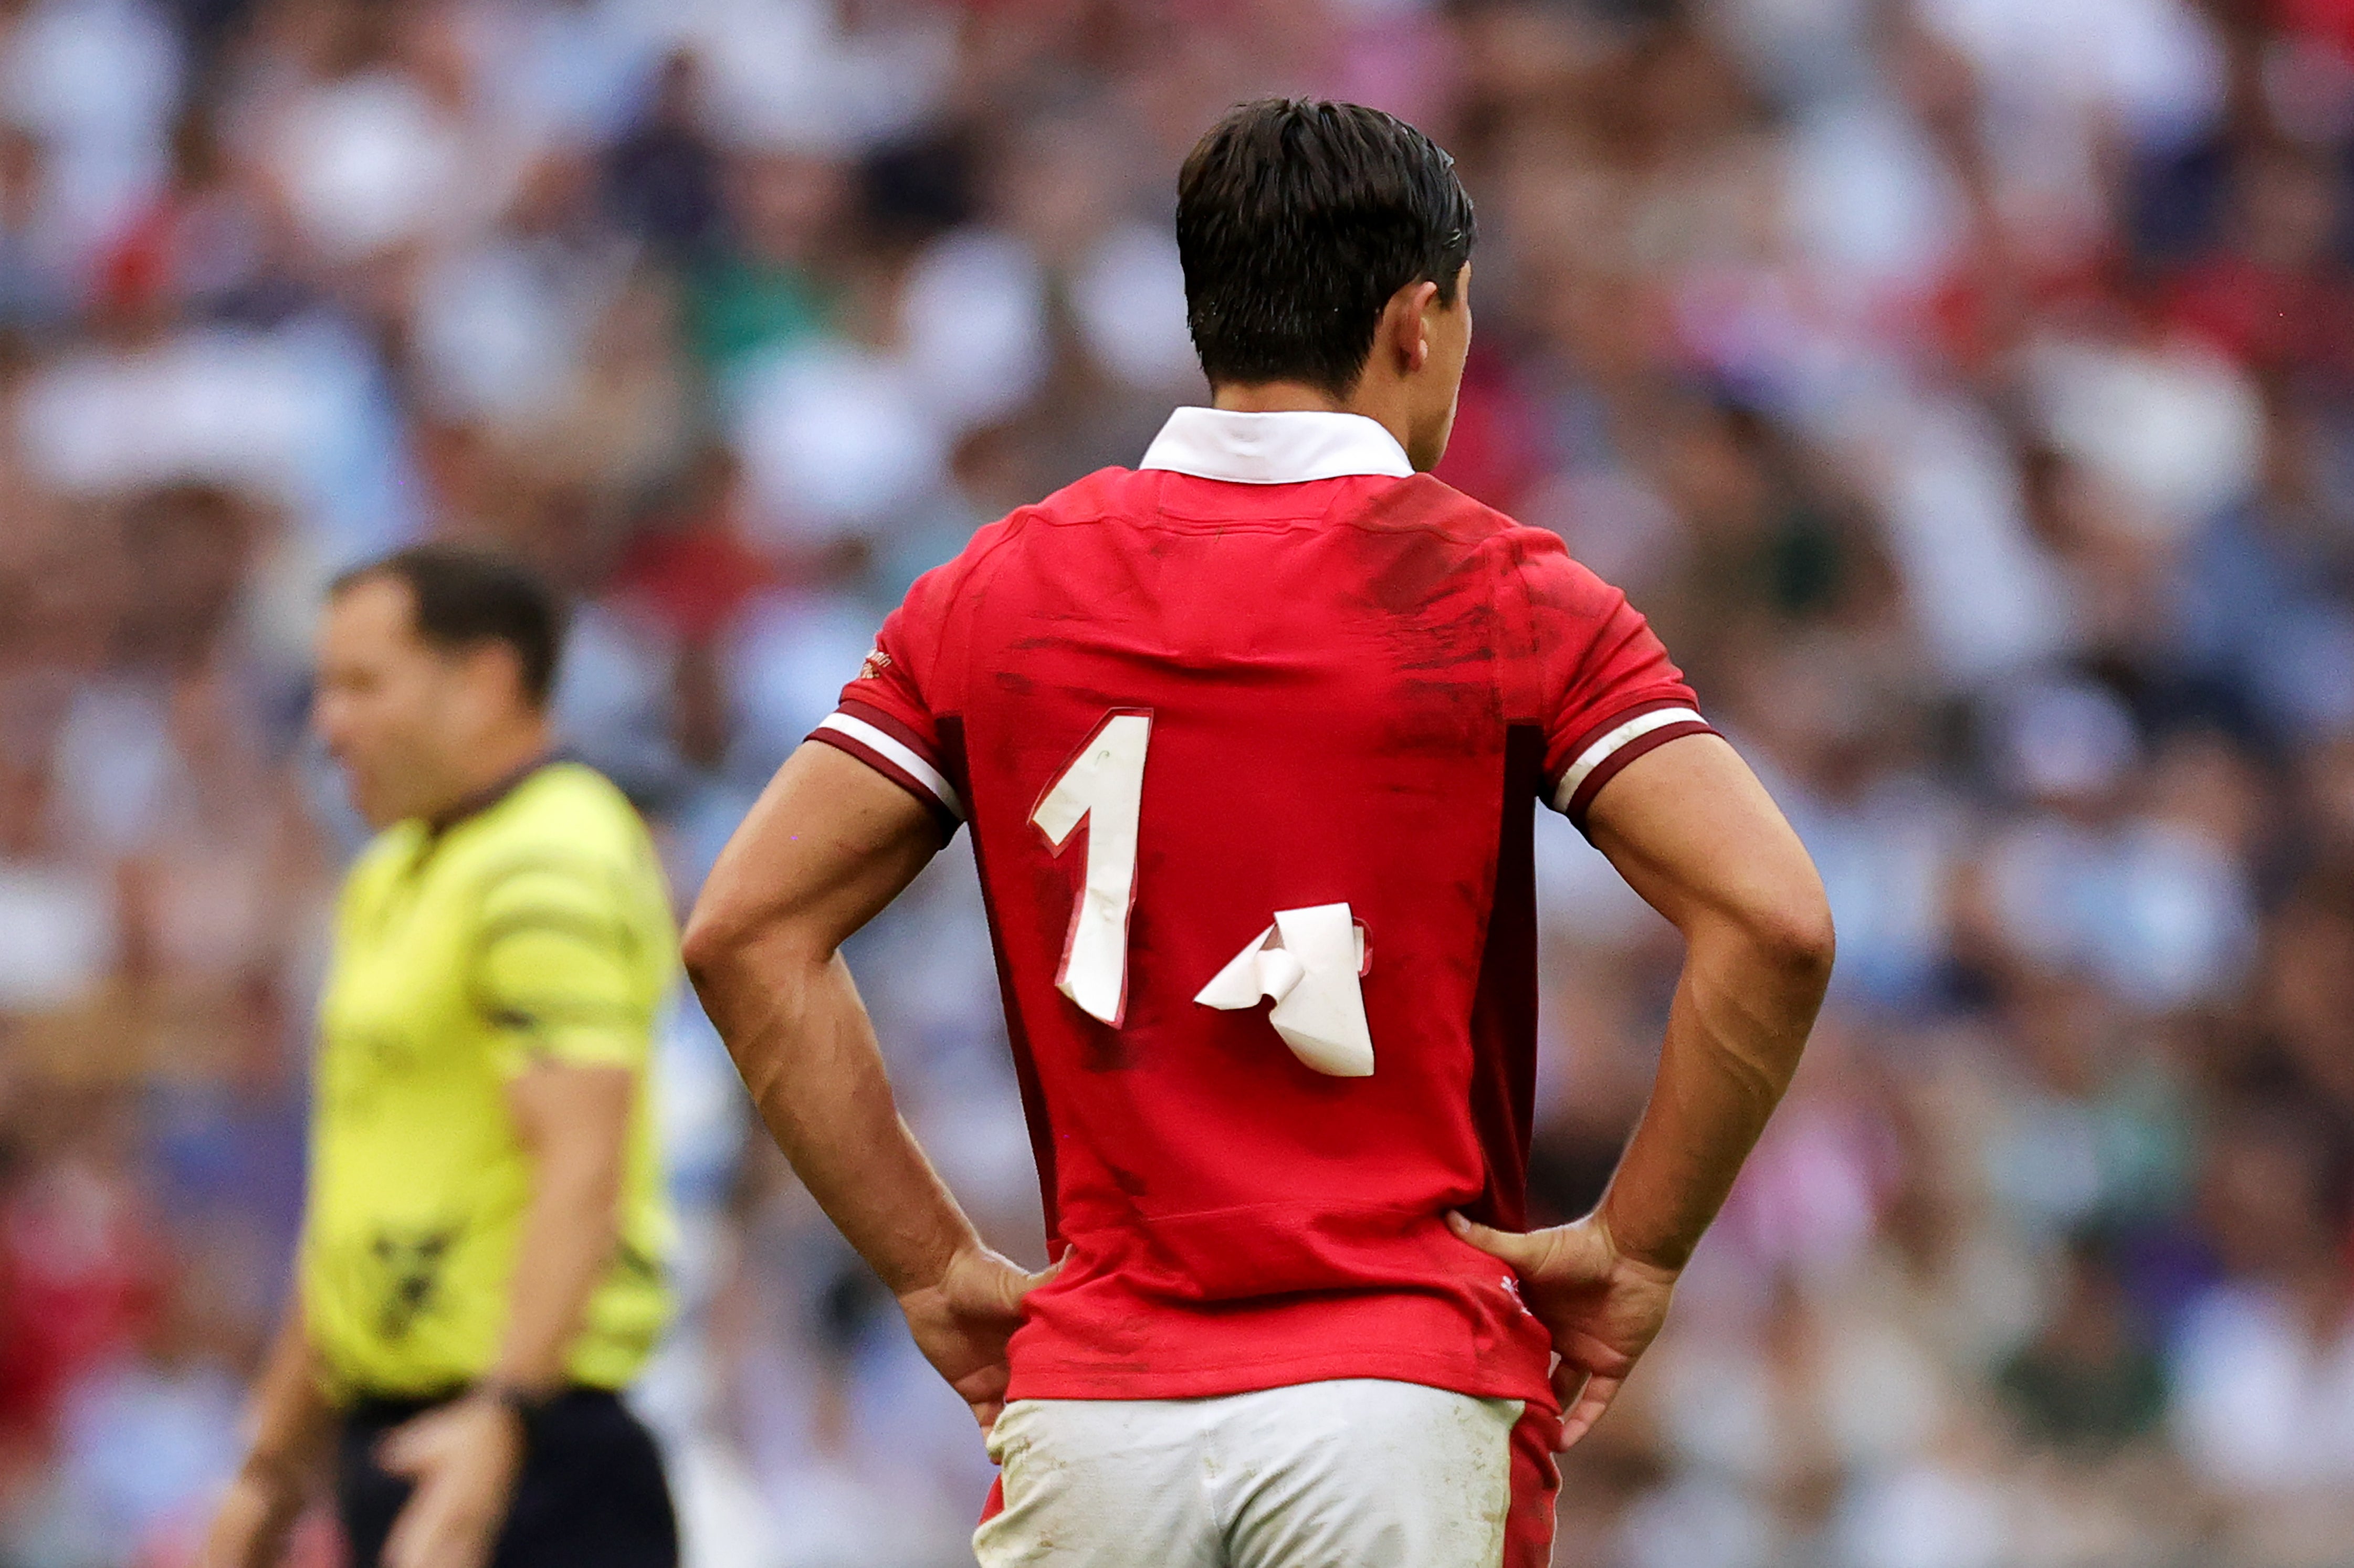 The numbers of the Welsh players peeled off the back of their shirts in a bizarre first quarter